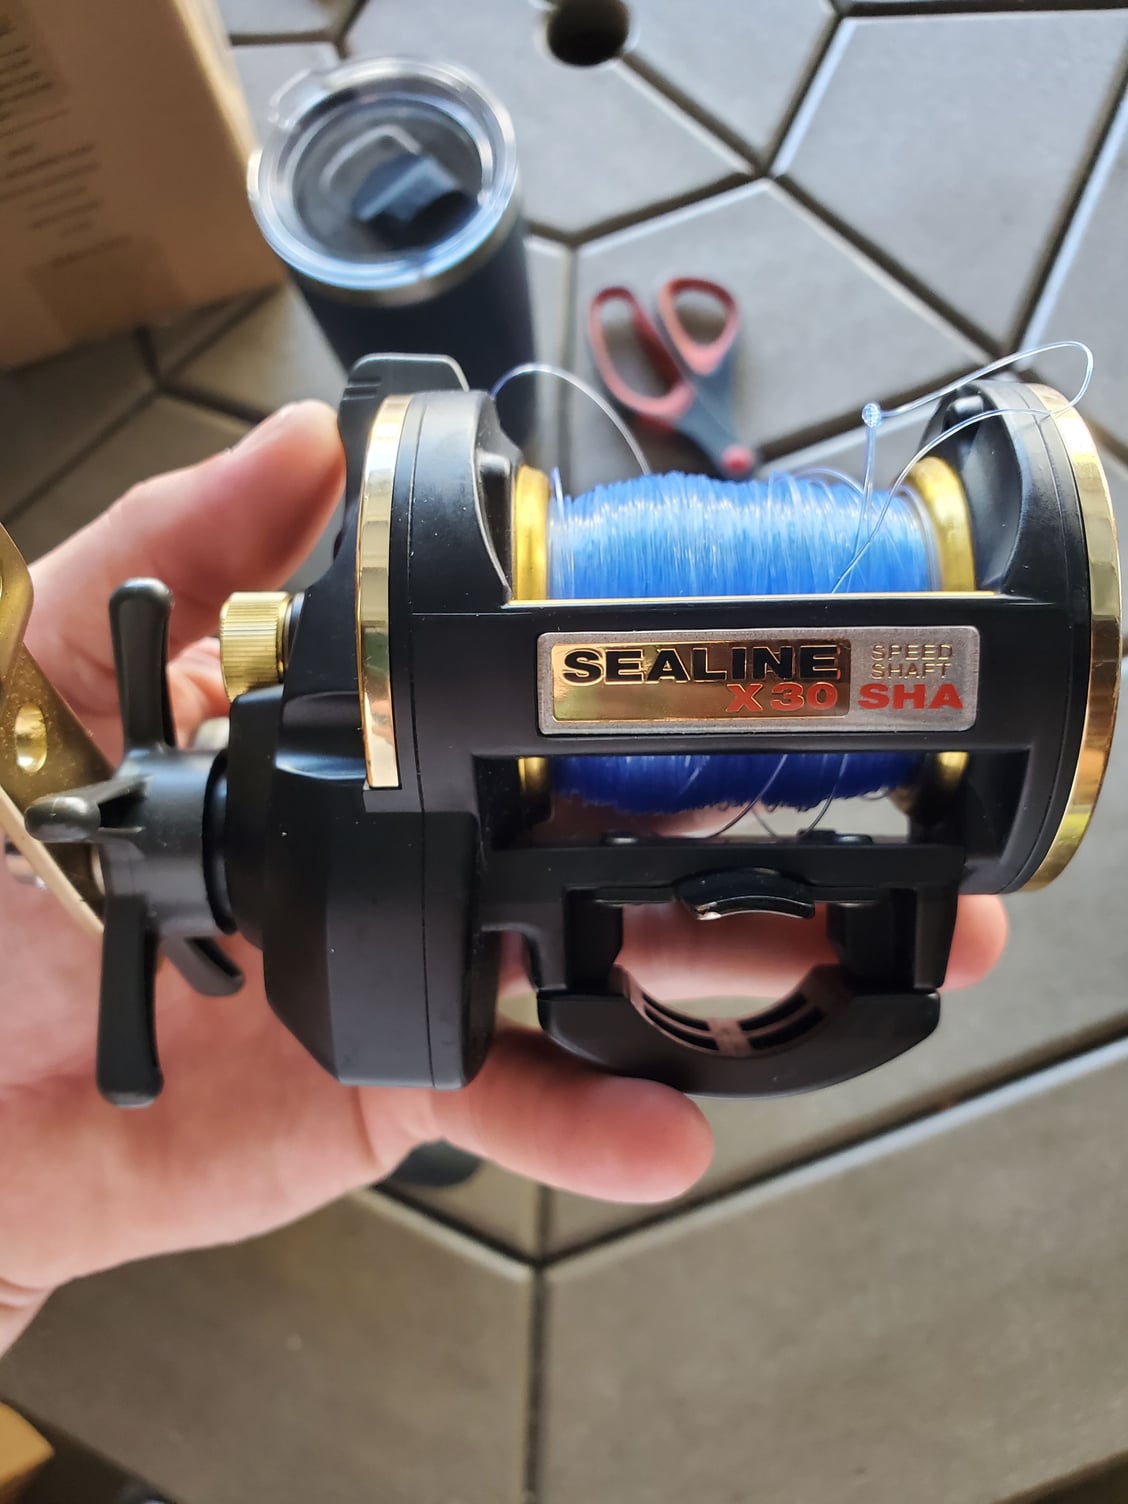 F/S Daiwa sealine reels - The Hull Truth - Boating and Fishing Forum